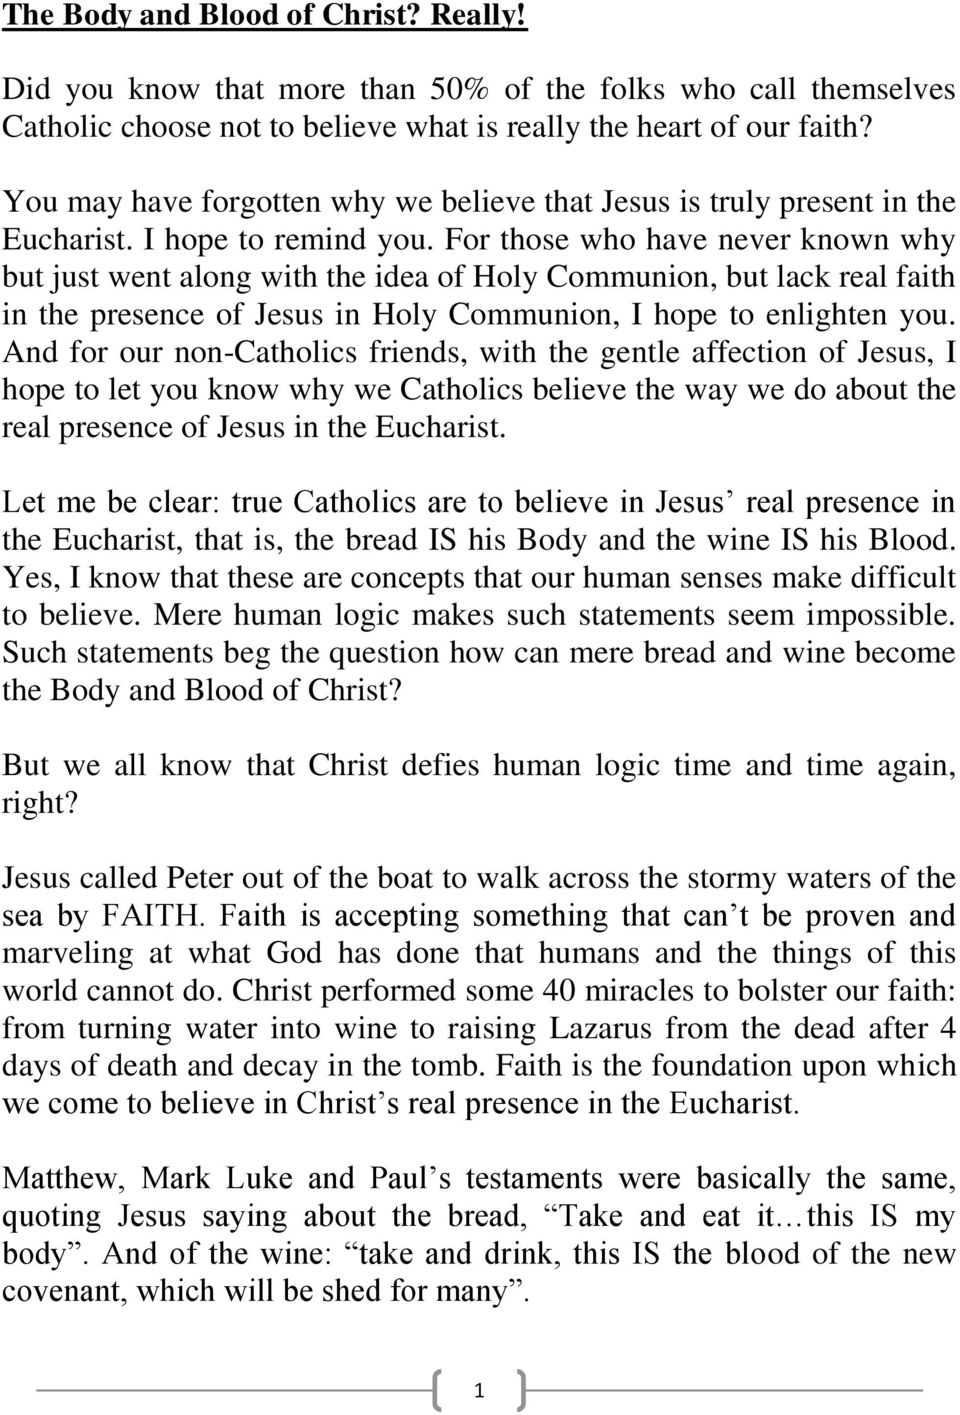 For those who have never known why but just went along with the idea of Holy Communion, but lack real faith in the presence of Jesus in Holy Communion, I hope to enlighten you.